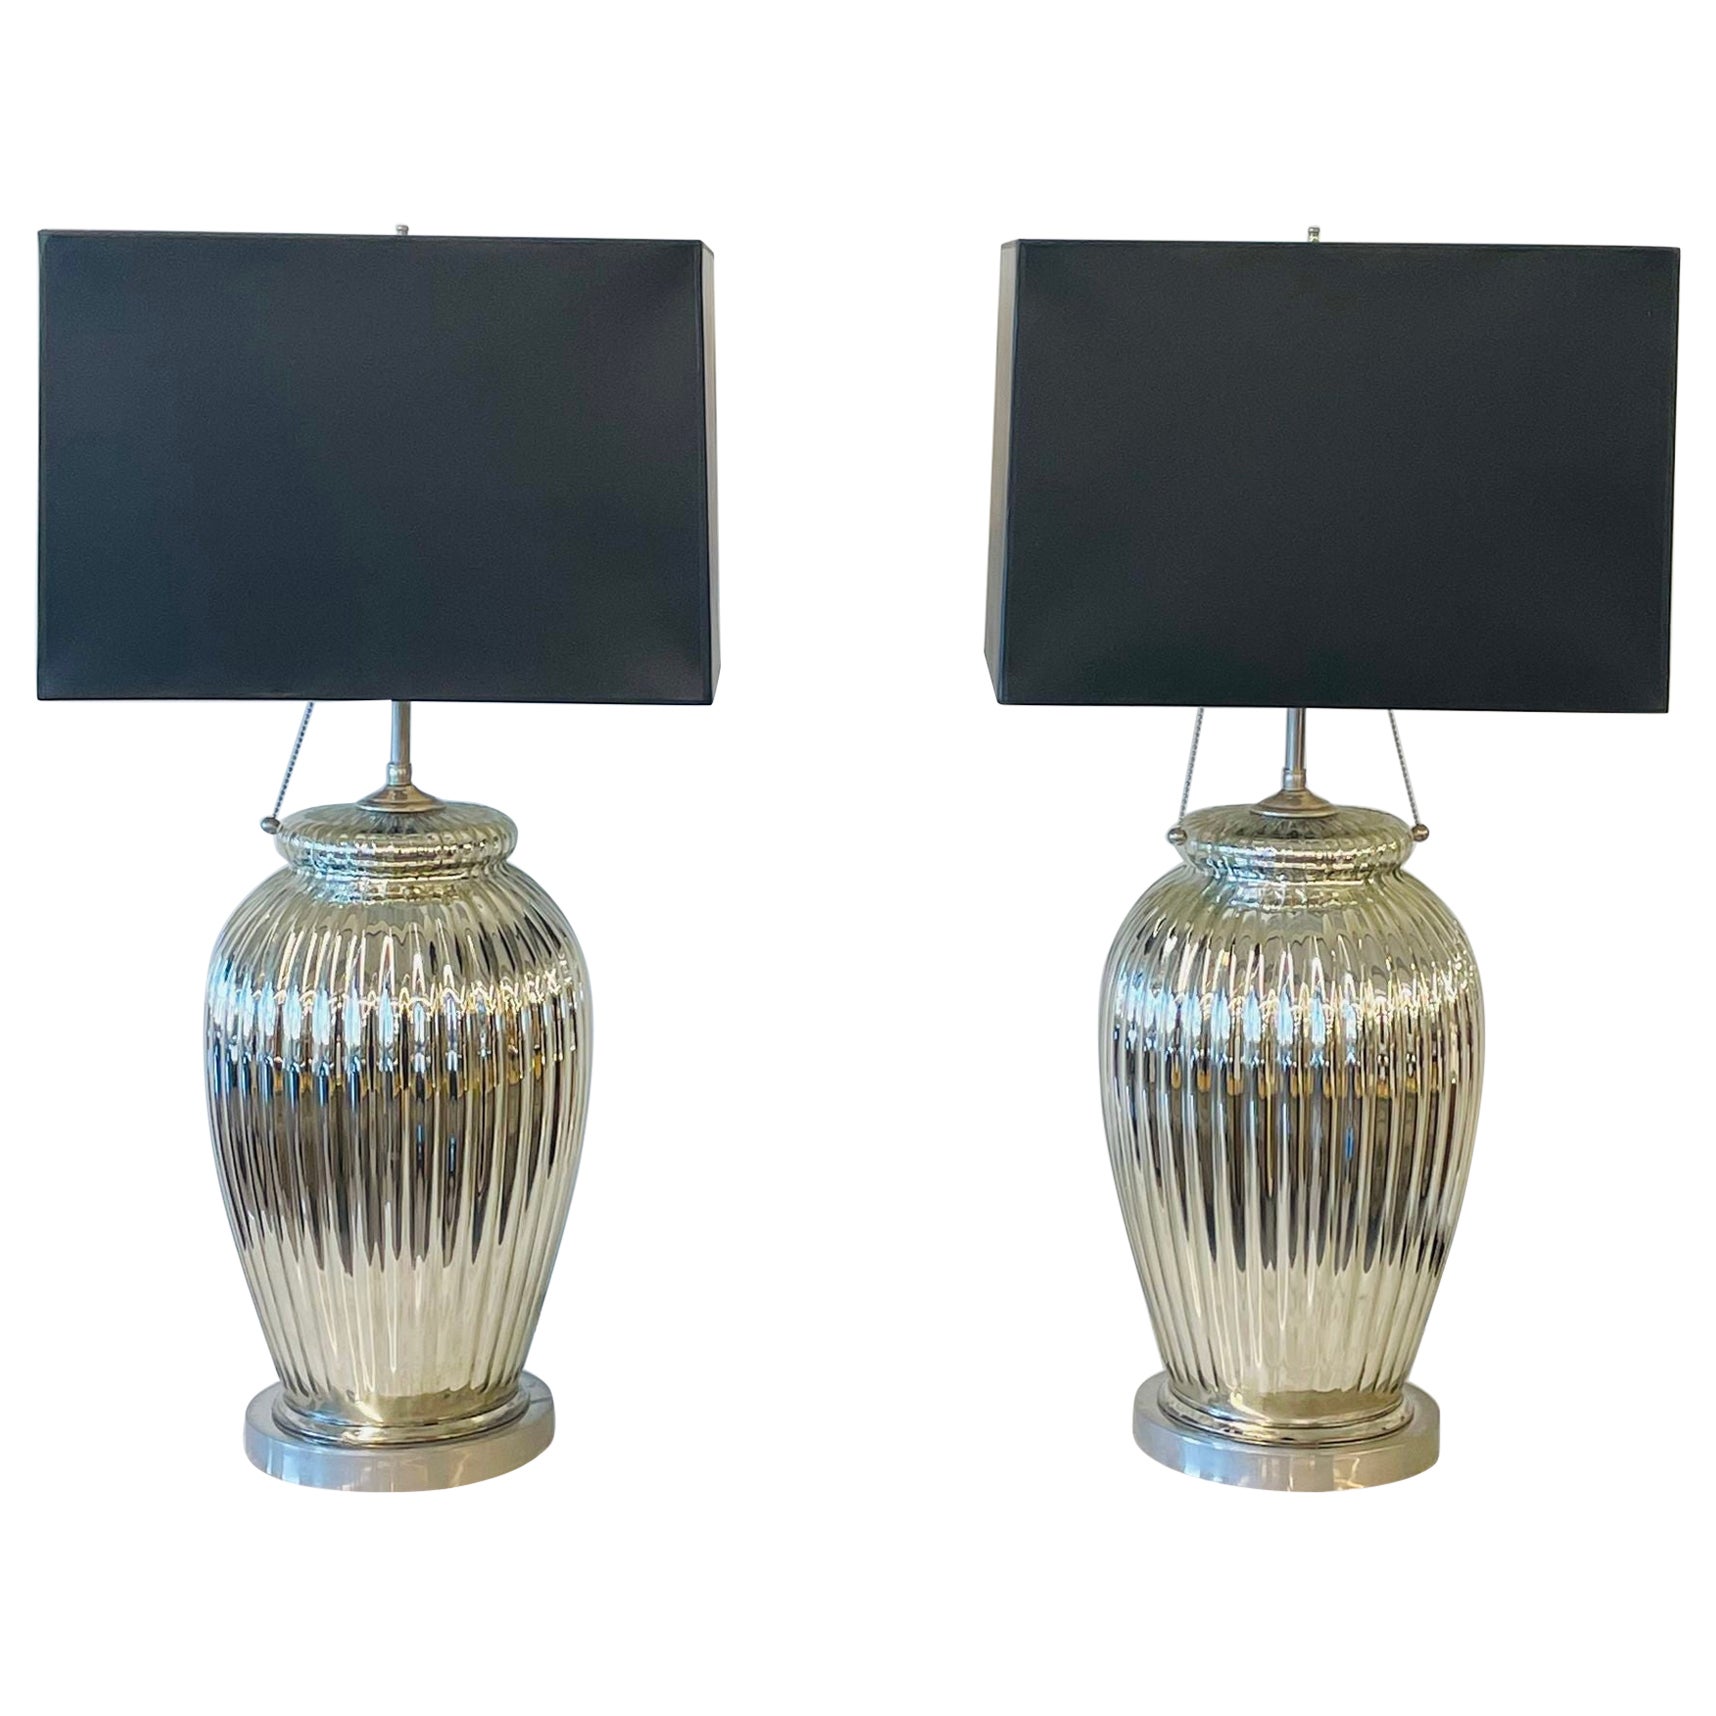 Pair of Mid-Century Modern Silver Table Lamps, Mercury Glass, Brass, Urn-Shaped For Sale